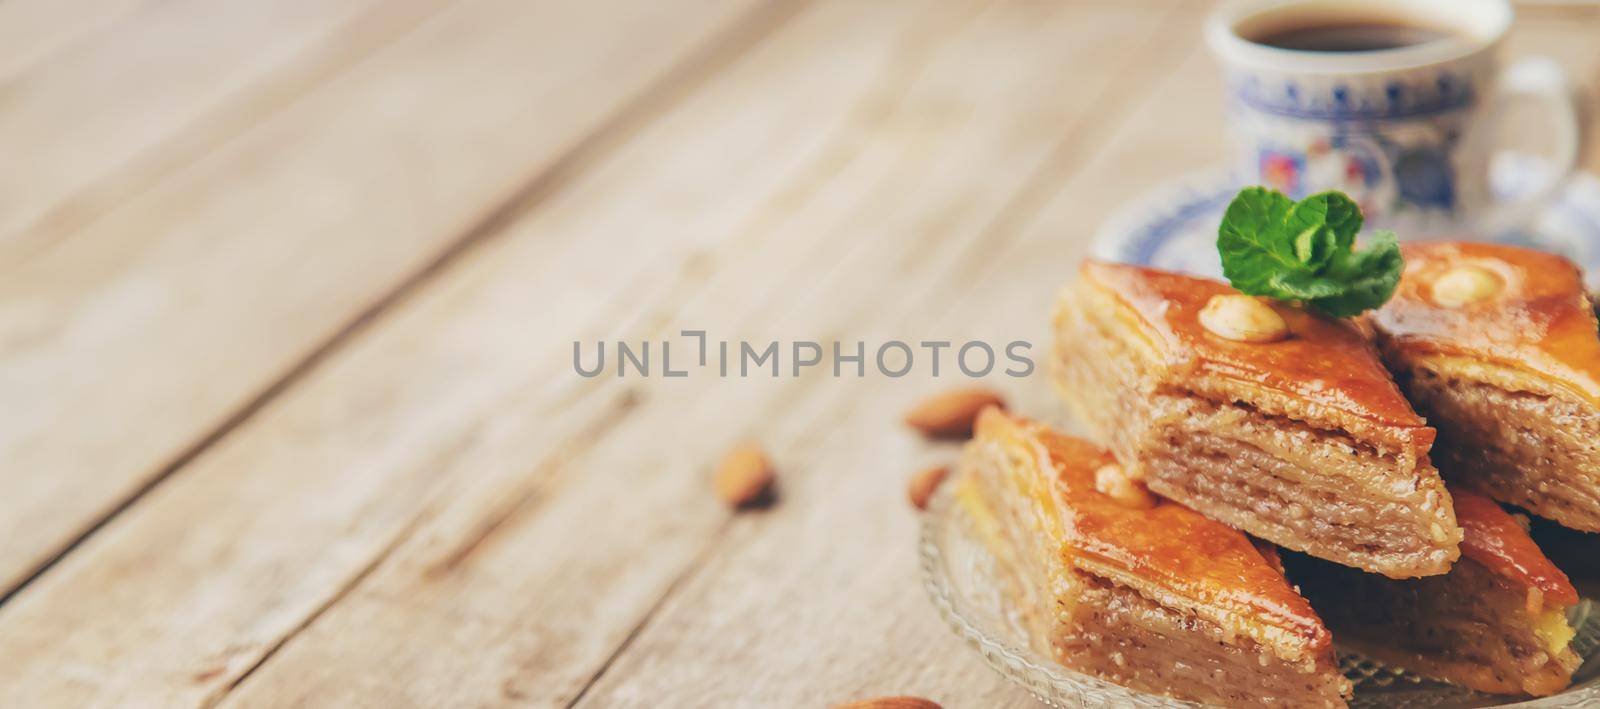 A cup of Turkish coffee and baklava. Selective focus. by yanadjana